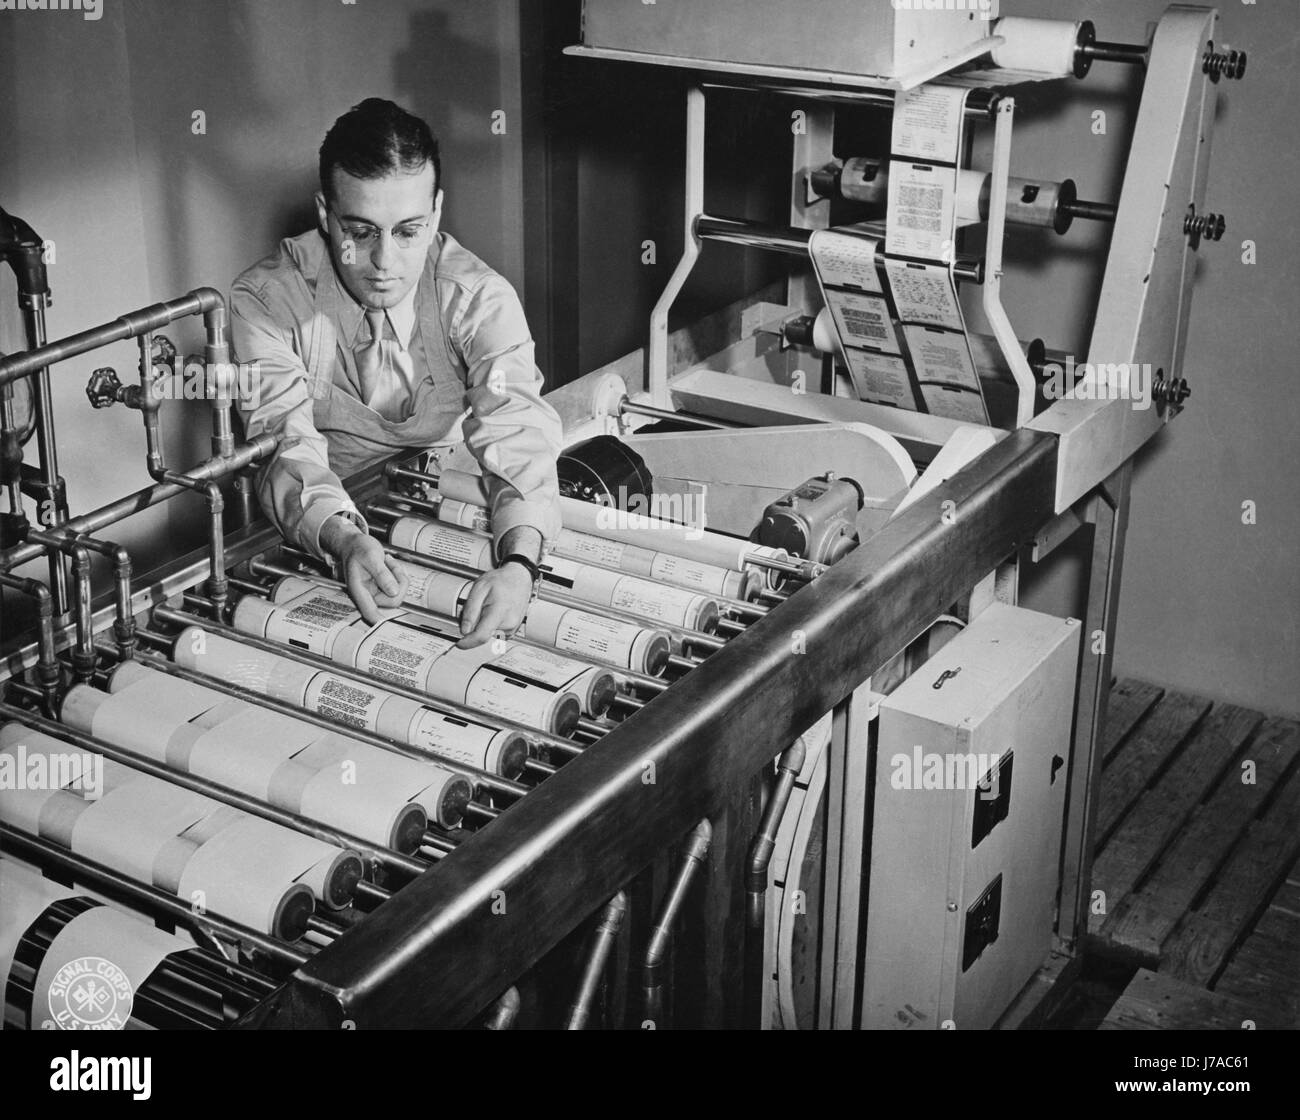 Paper reproductions from V-mail microfilm are developed on a paper processing machine, 1943. Stock Photo